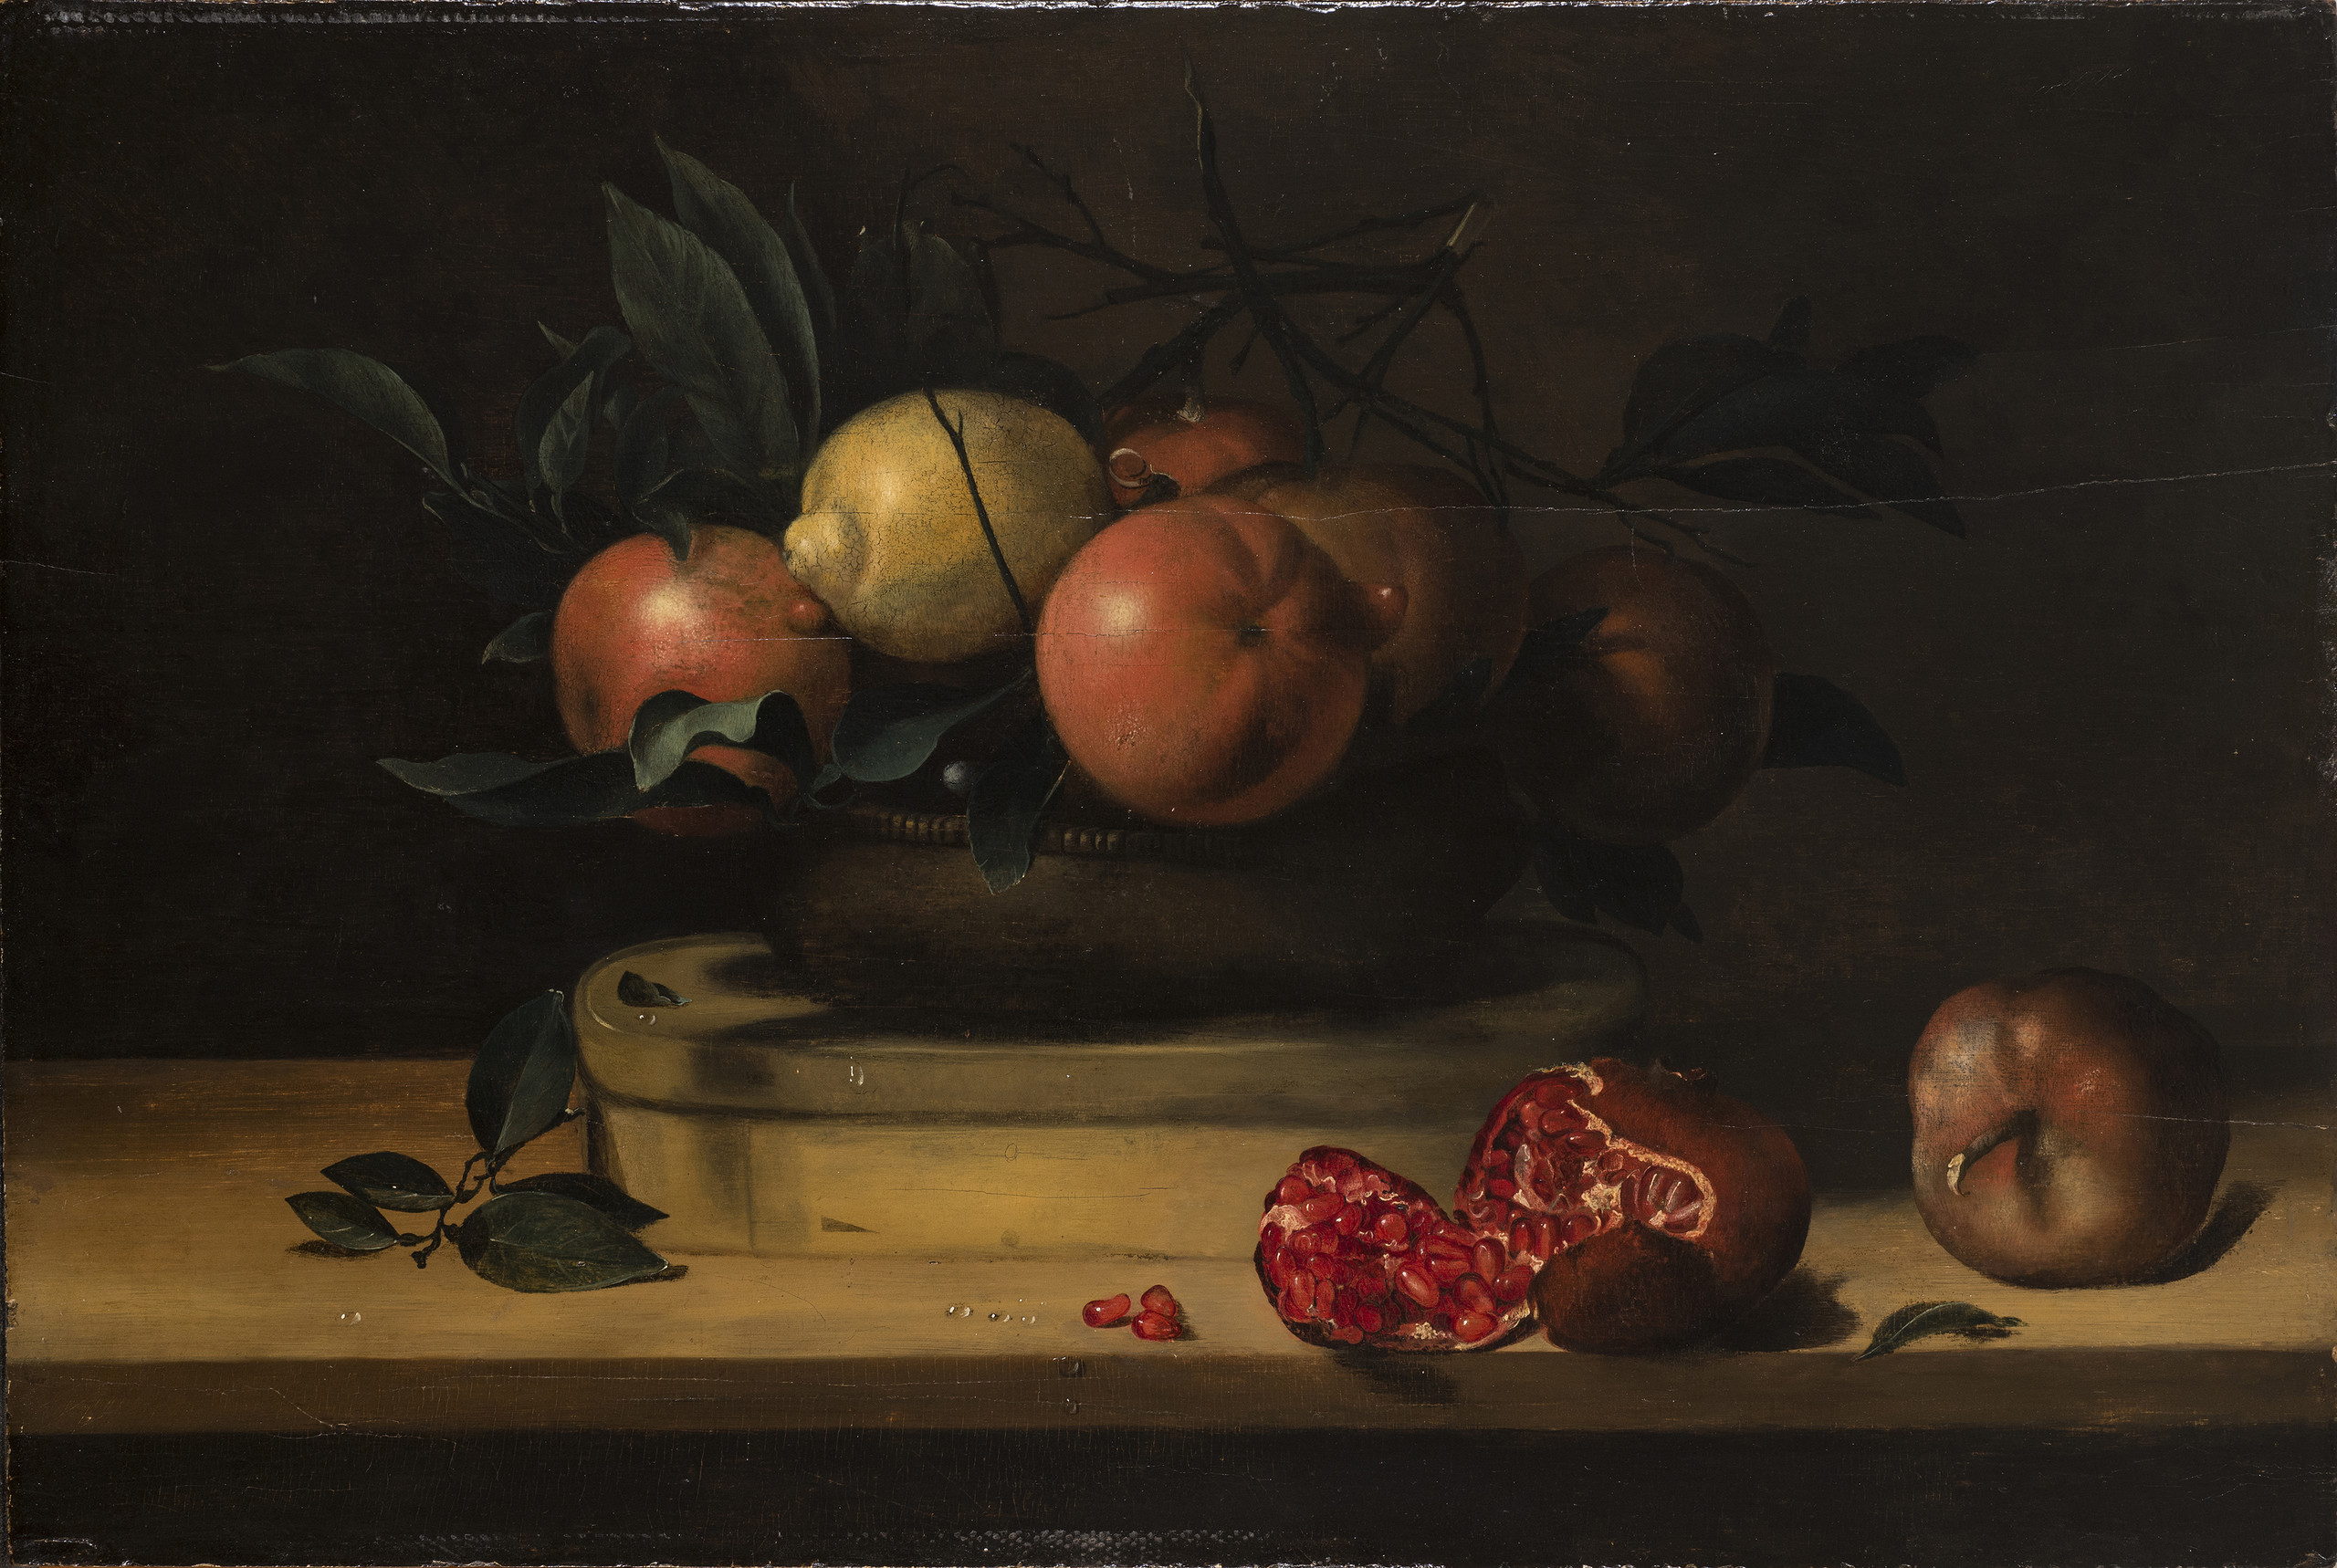 A vessel mounded with 5 oranges, a lemon, and greenery sits atop an oval, wooden box resting on a wooden plank. In the foreground, two pomegranates, one of which has split open and dropped three seeds, balance near the plank’s edge. Droplets of water dot the fruit and the table.